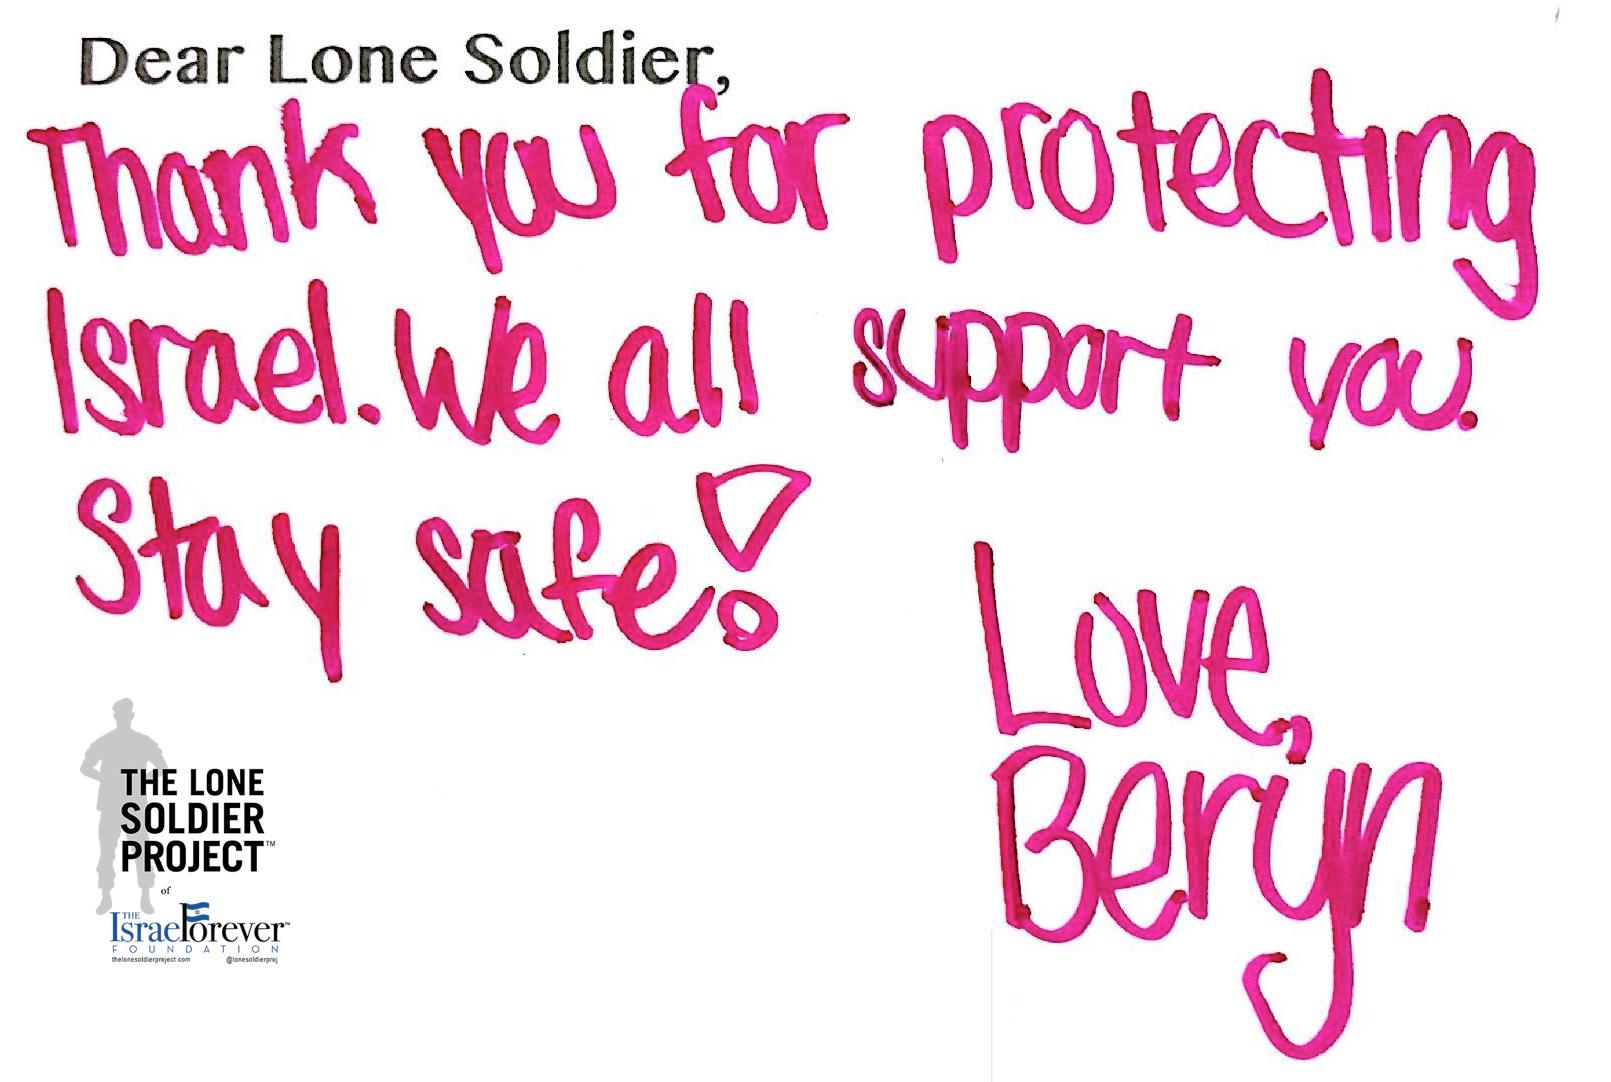 "Dear Lone Soldiers" from campers at URJ Camp Harlam